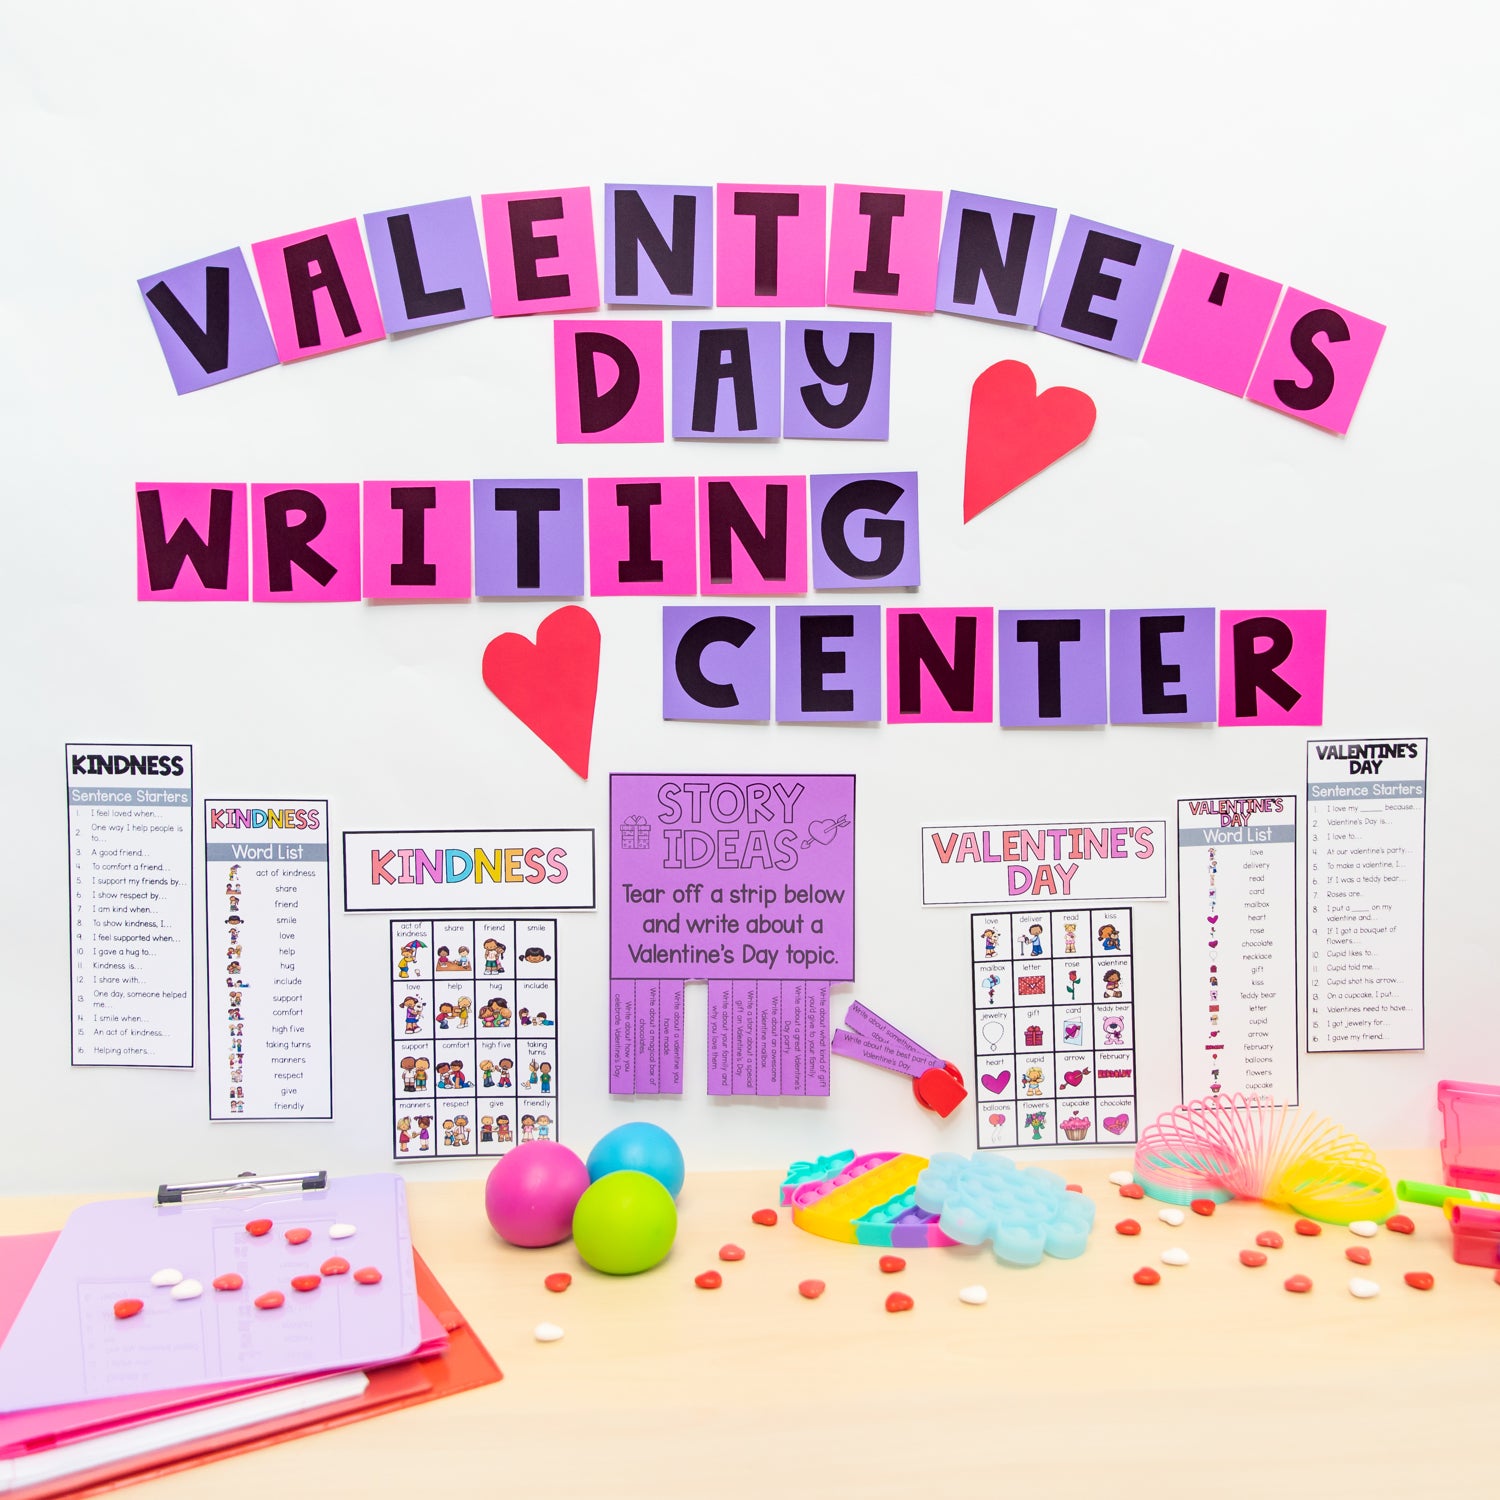 February Writing Center Prompts, Activities, Posters - Valentine's Day, Kindness